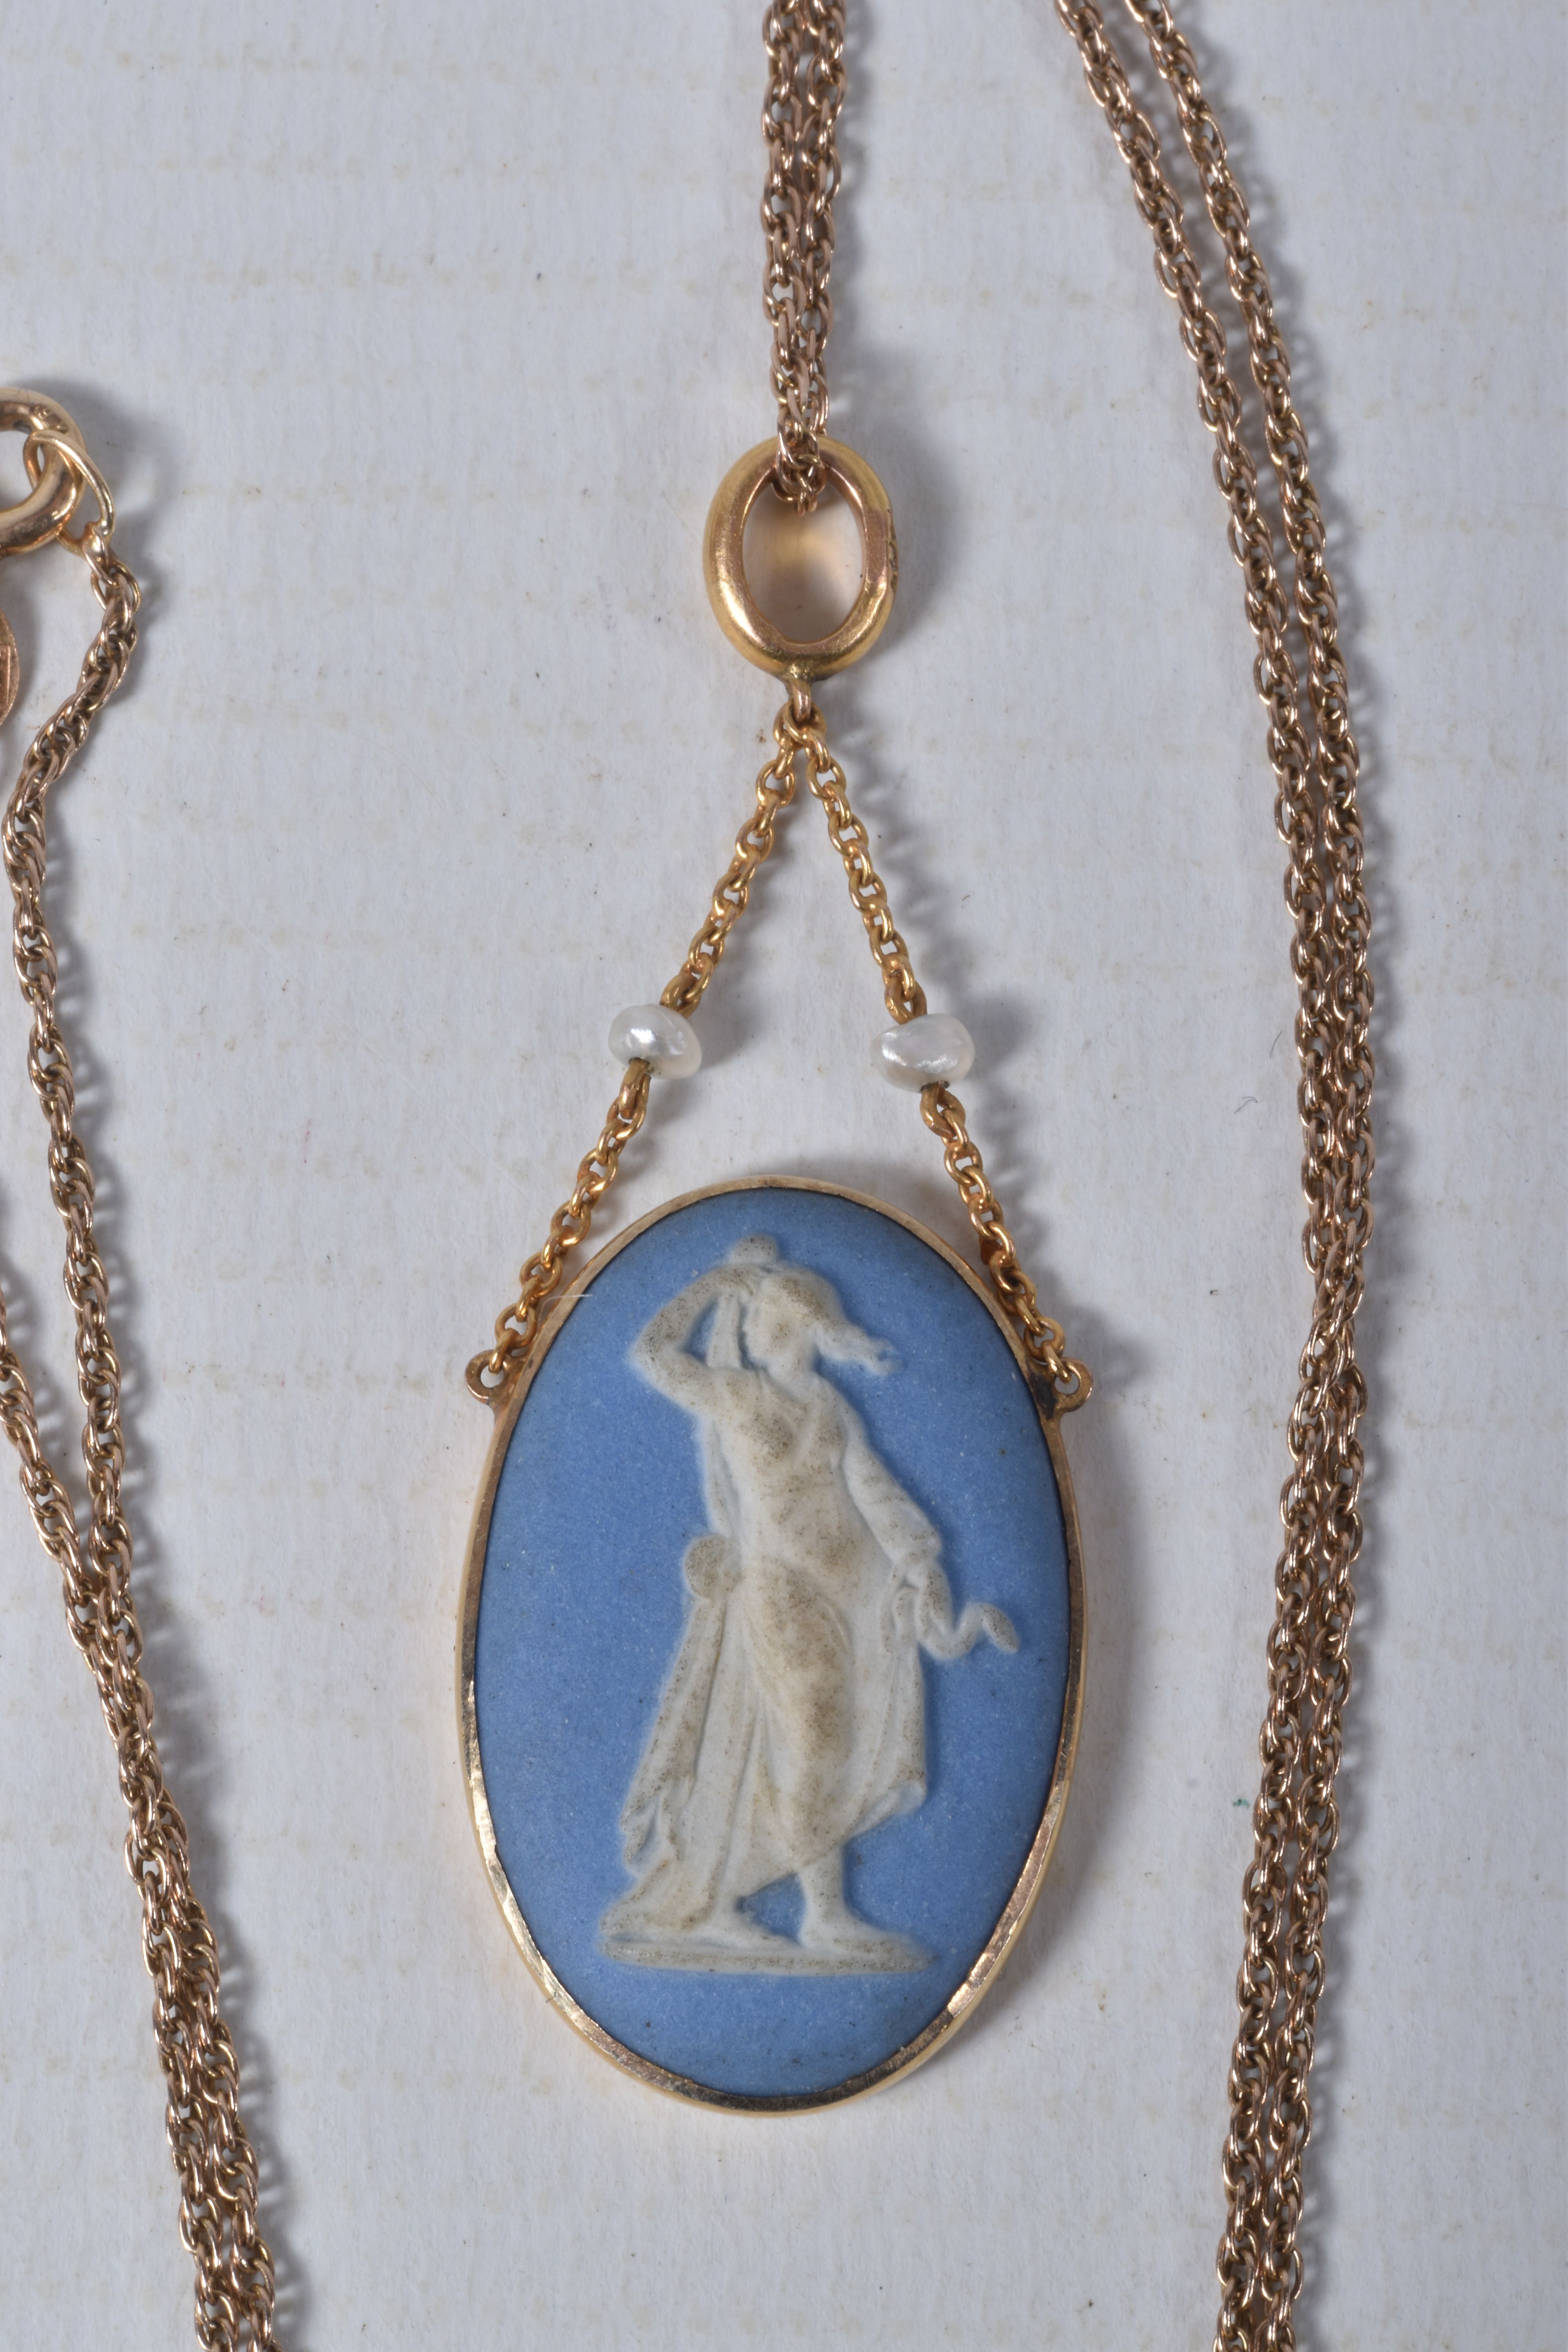 A 9CT GOLD WEDGWOOD PENDANT NECKLACE, the oval Wedgwood pendant depicting a female figure, suspended - Image 3 of 5